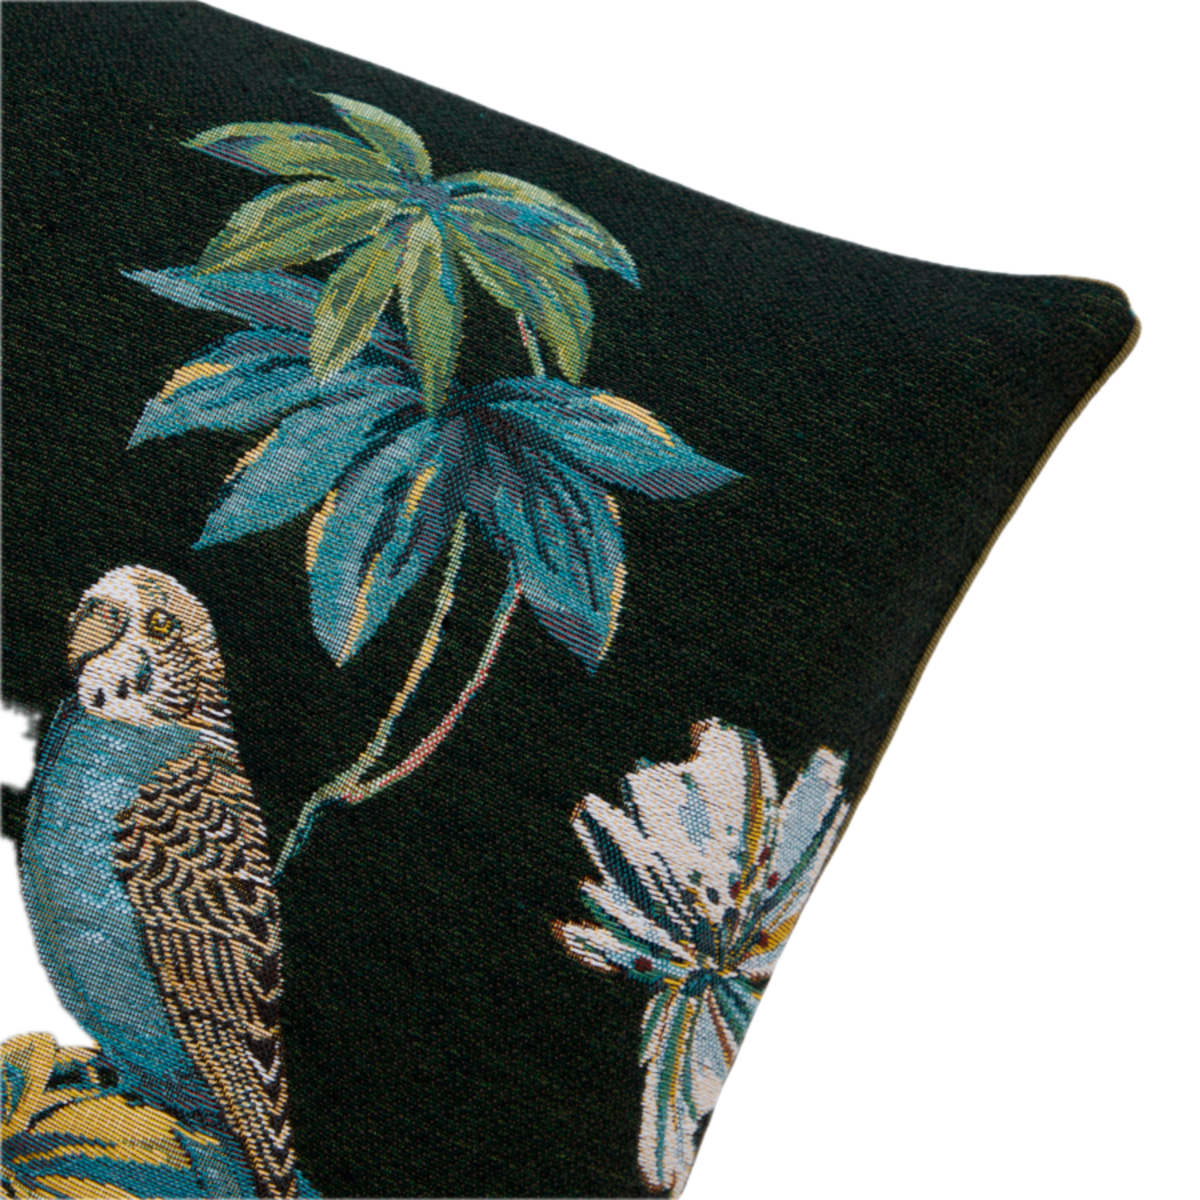 Corner Detail of Decorative Pillow of Yves Delorme Tropical Bedding in Foret Color